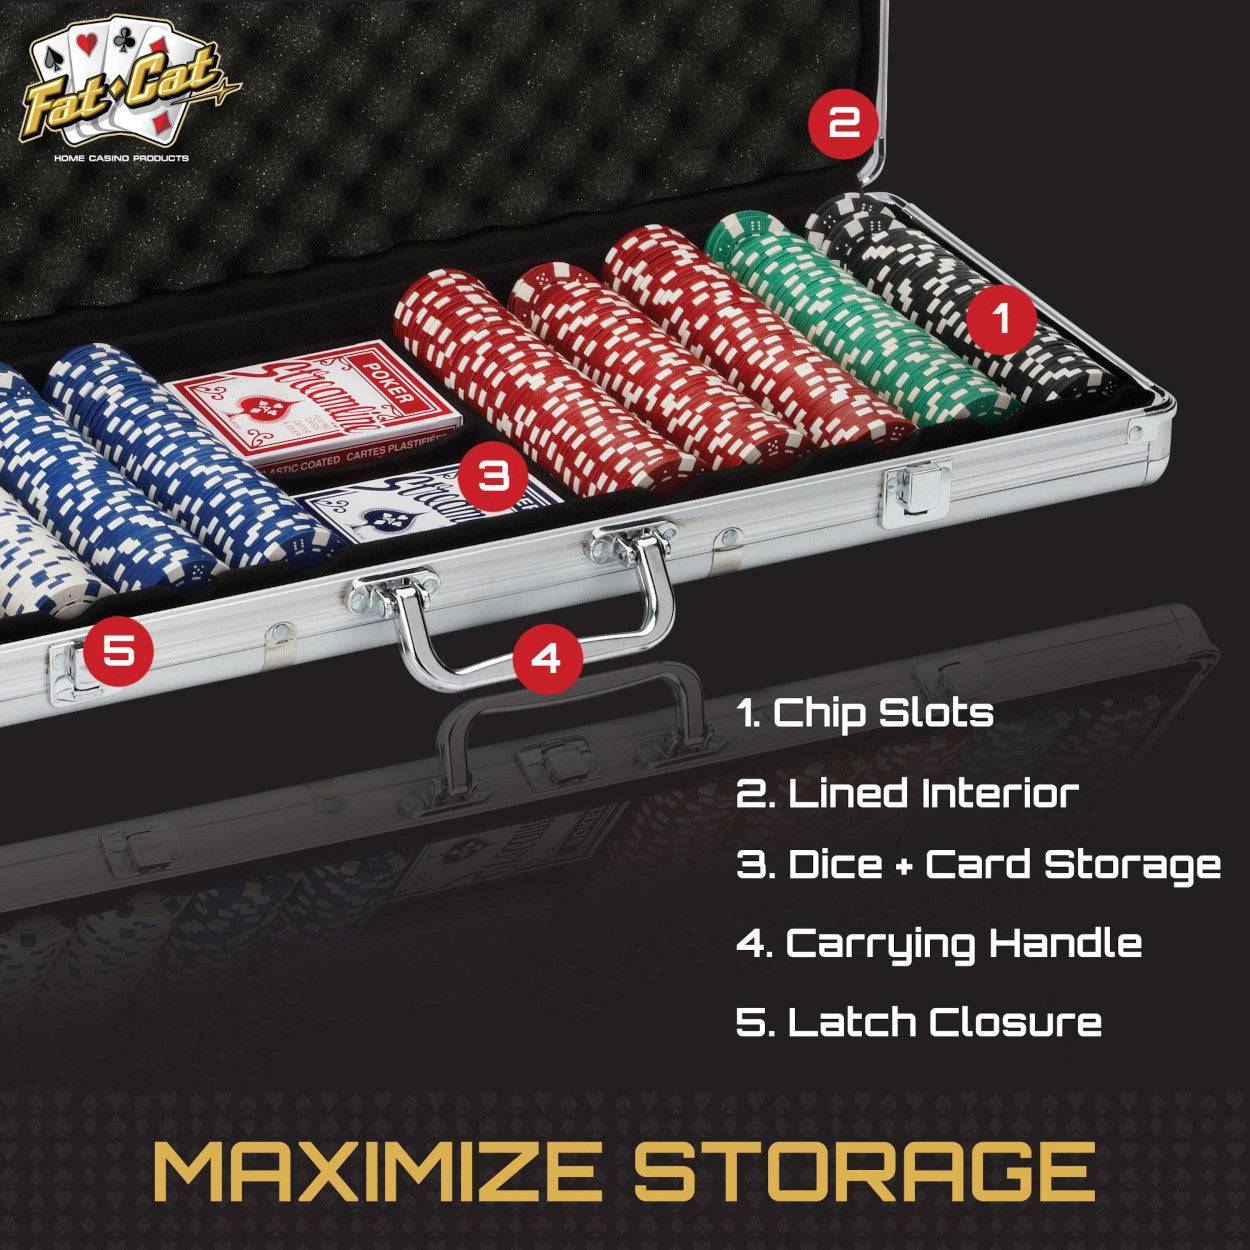 500 chip count poker set includes two decks of cards, dealer and blind buttons, dice, 5 colors of chips and metal carry case.